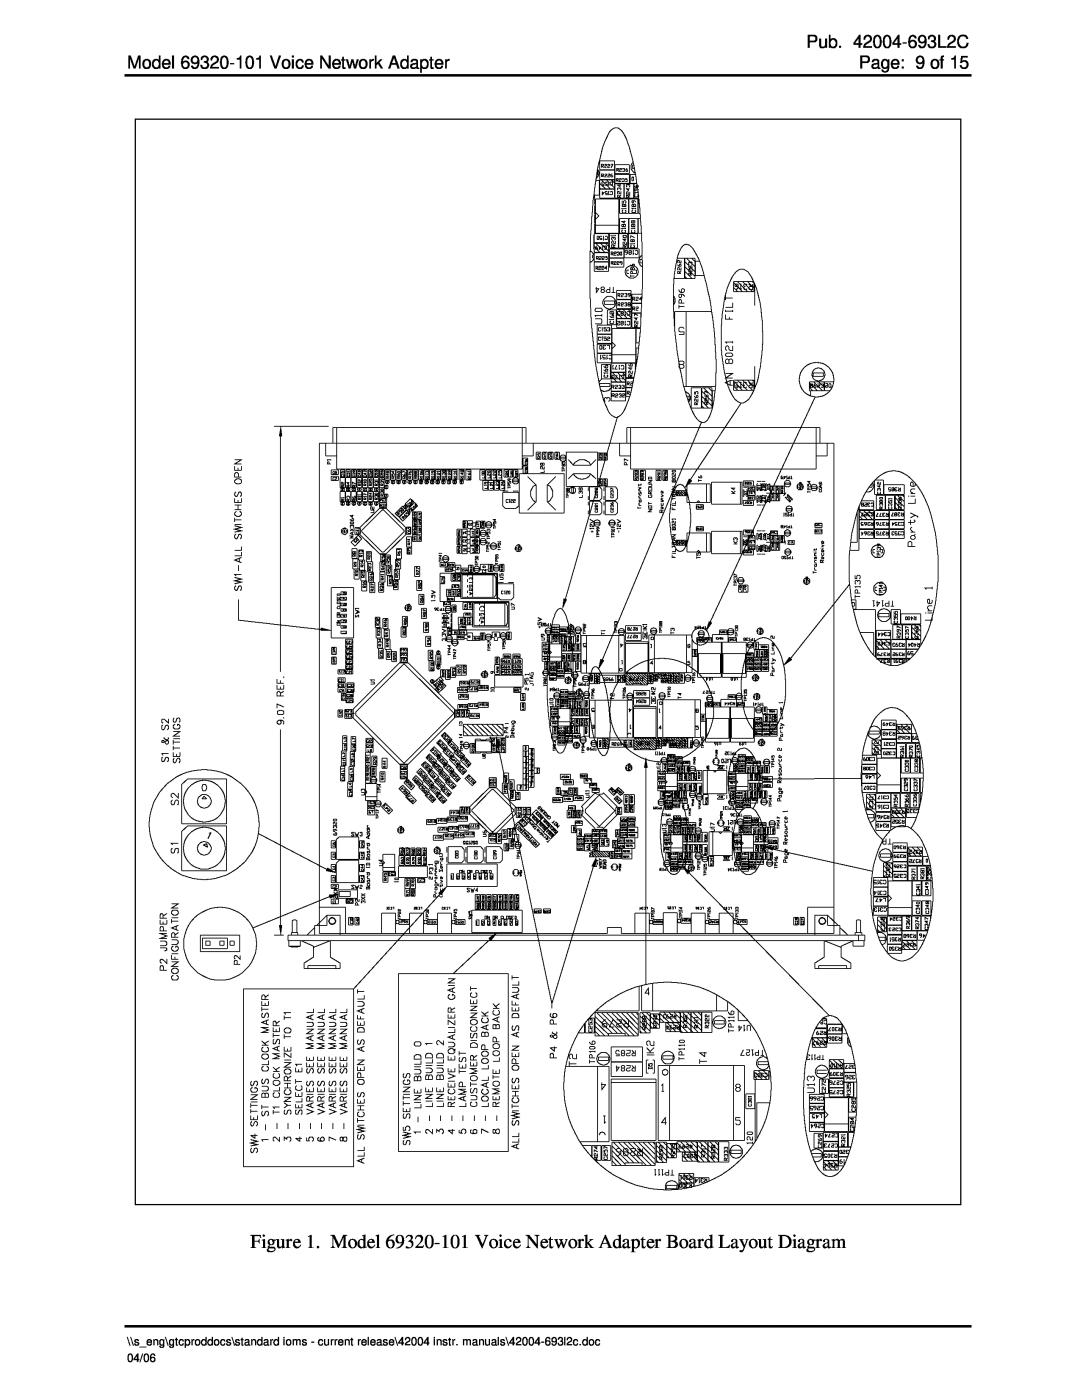 Hubbell manual Model 69320-101 Voice Network Adapter Board Layout Diagram, Pub. 42004-693L2C, Page 9 of 